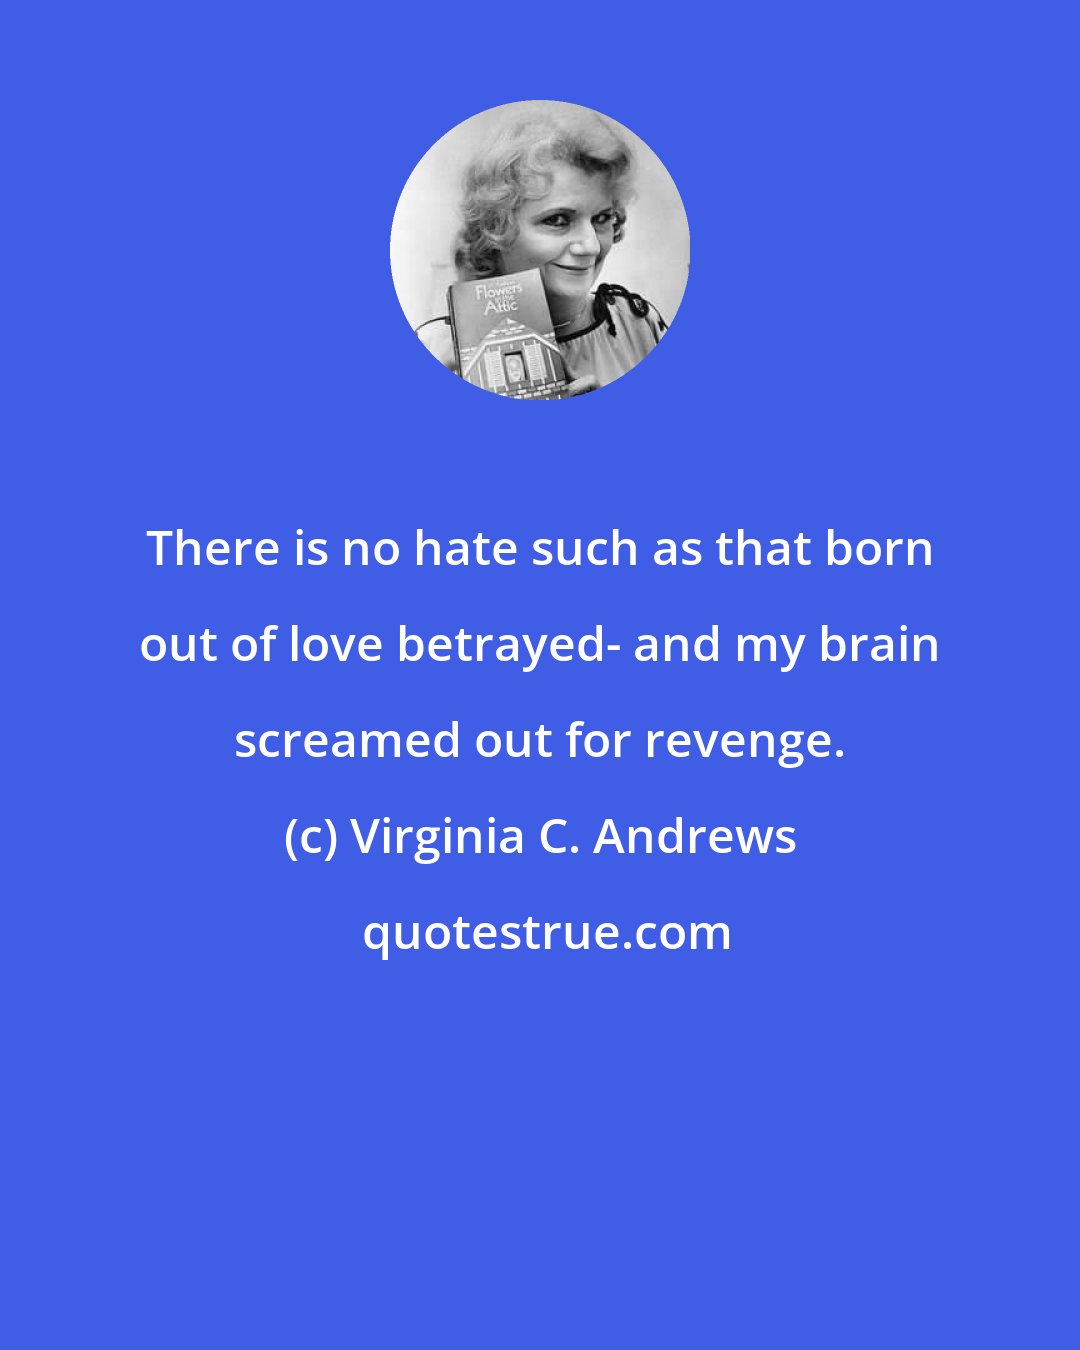 Virginia C. Andrews: There is no hate such as that born out of love betrayed- and my brain screamed out for revenge.